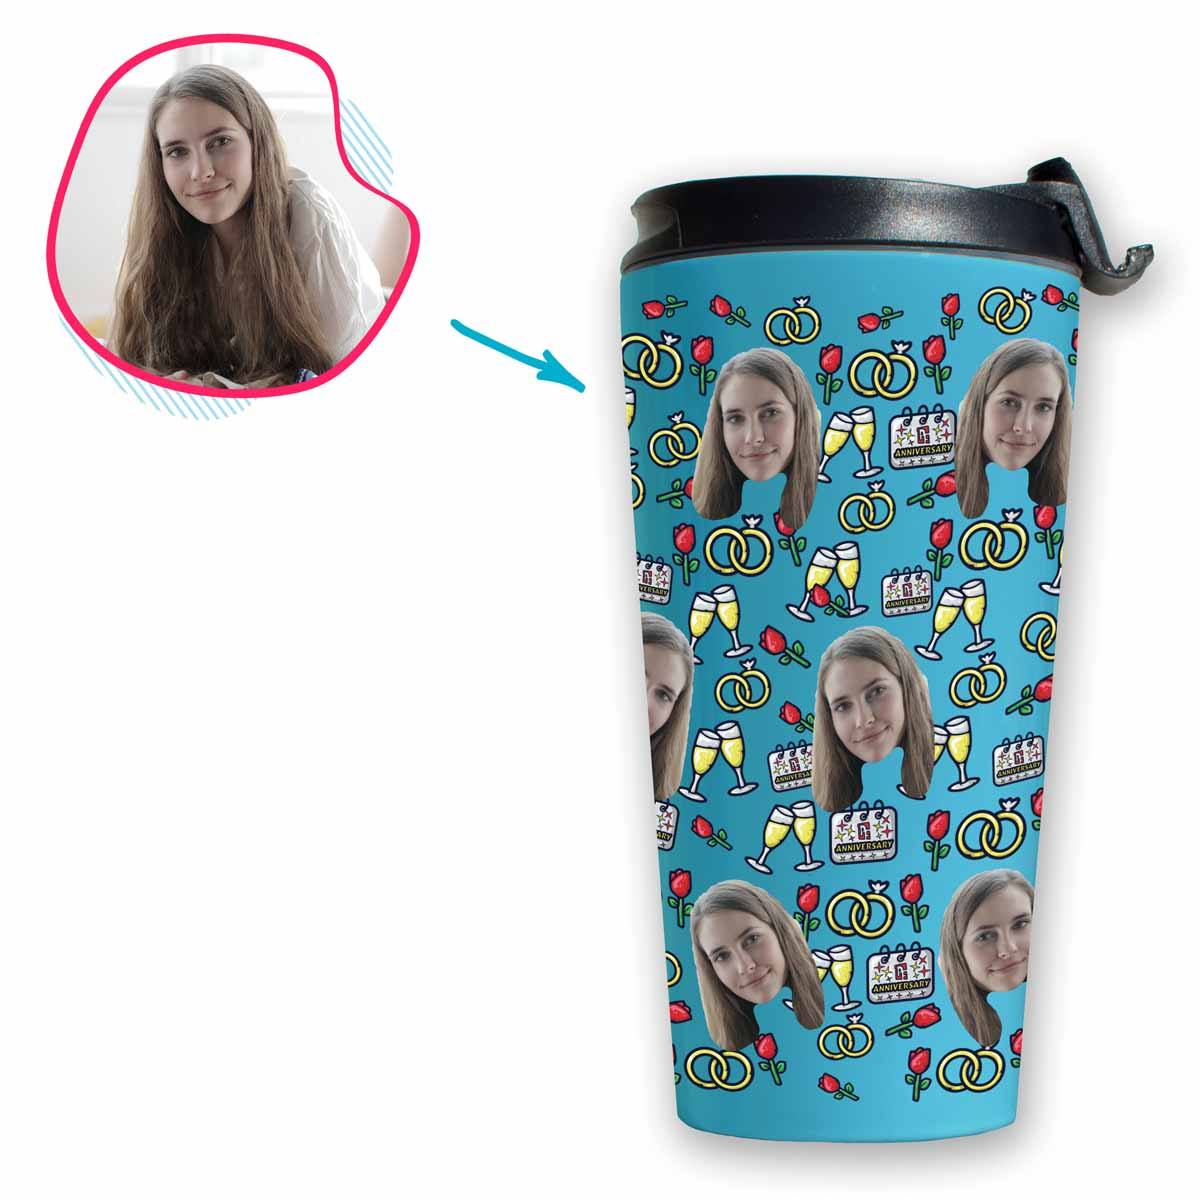 Blue Anniversary personalized travel mug with photo of face printed on it